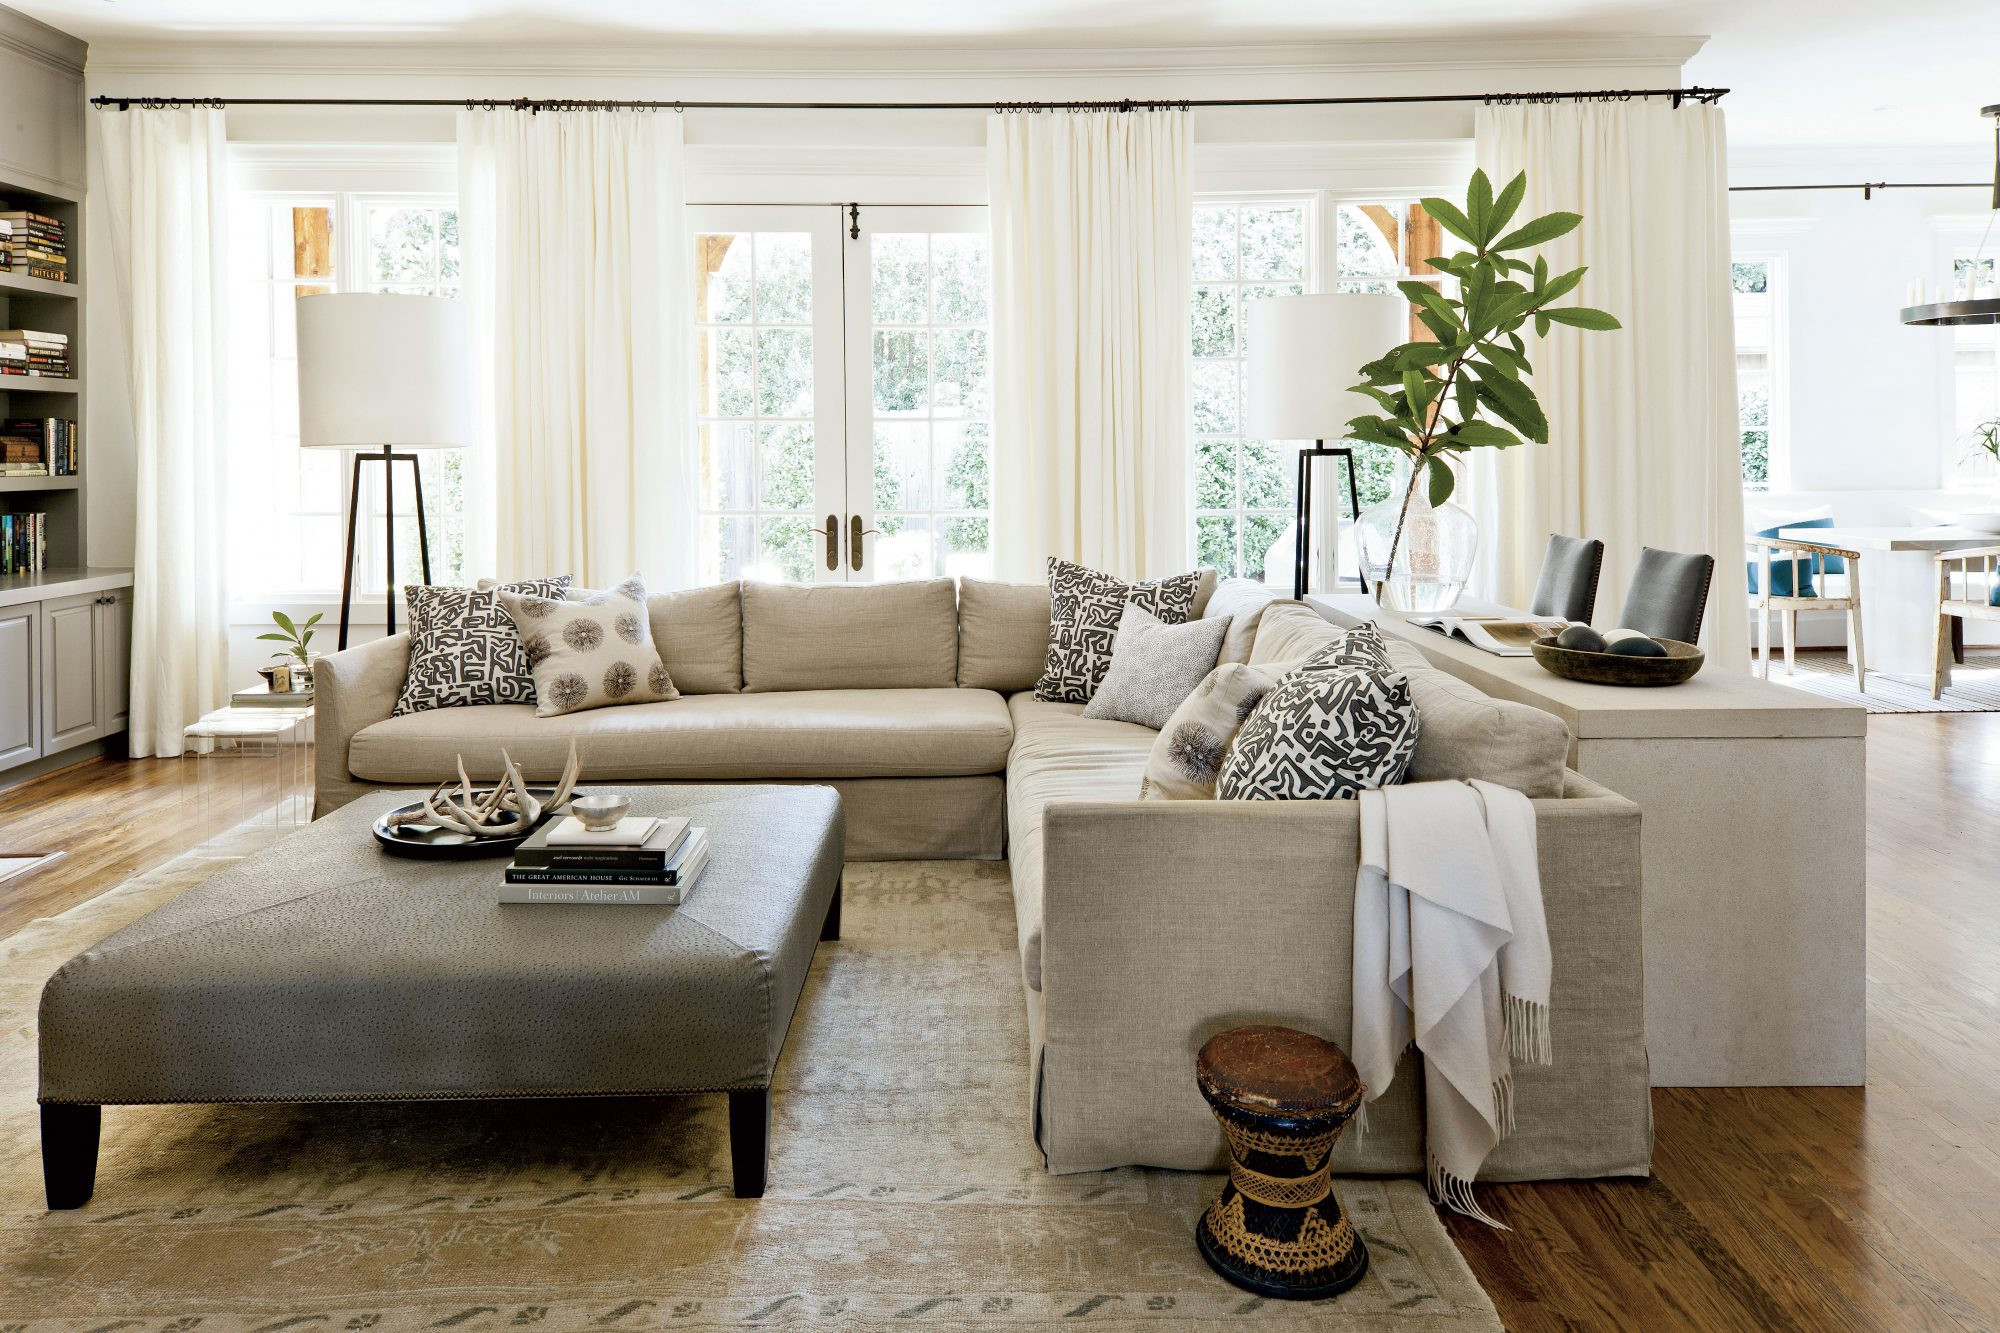 Neutral Living Room Colors
 We Love This Gray Paint Color for Living Rooms Southern